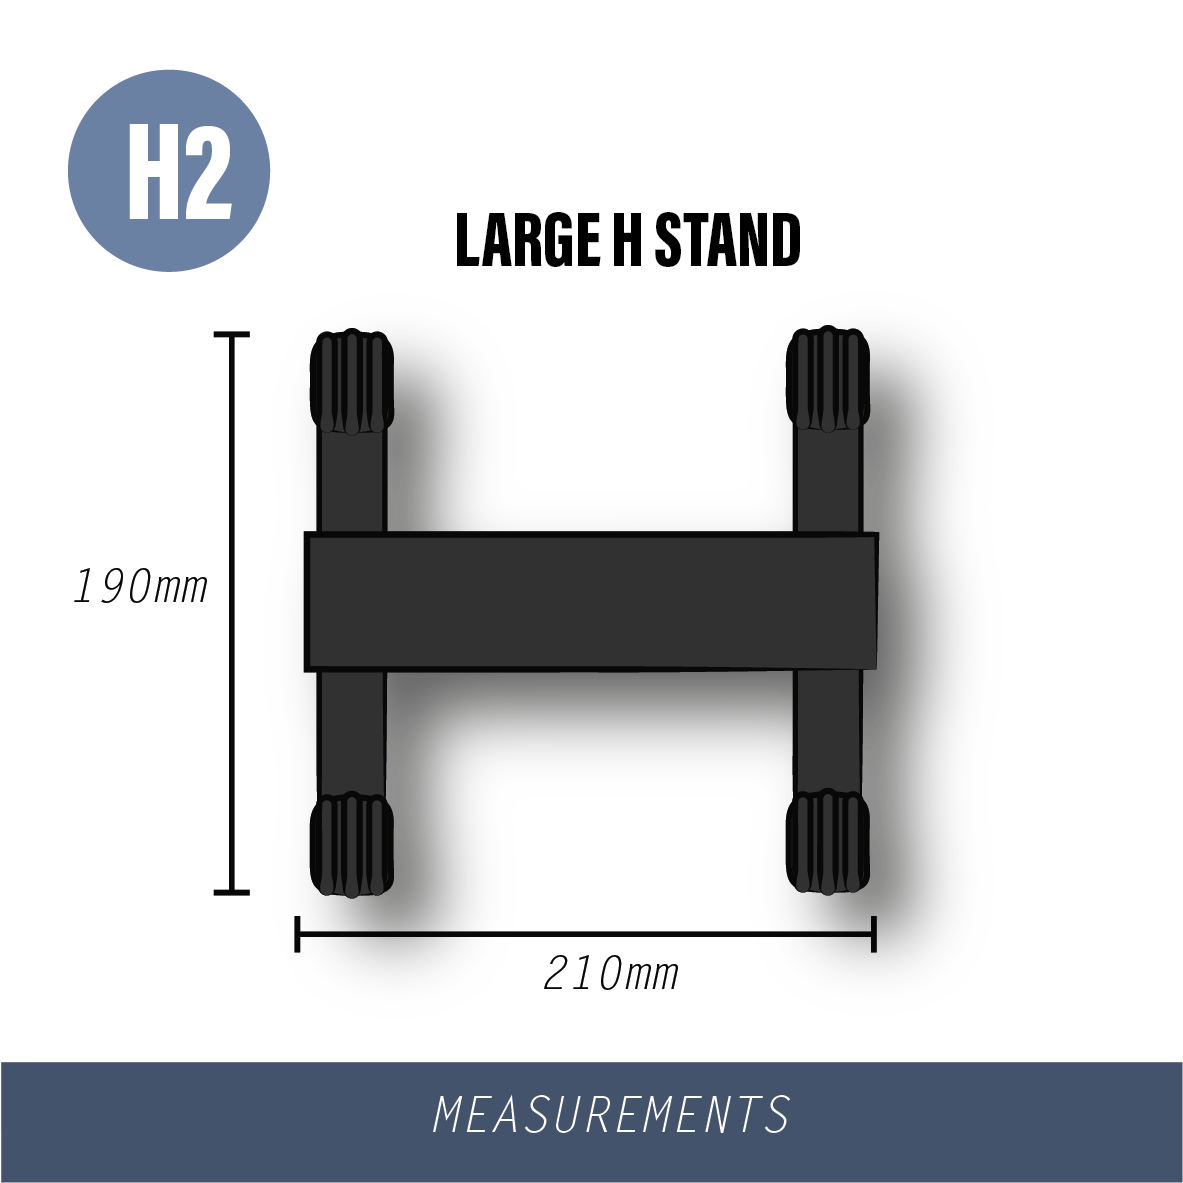 H2-LARGE H STAND (NEW Heavier Version)